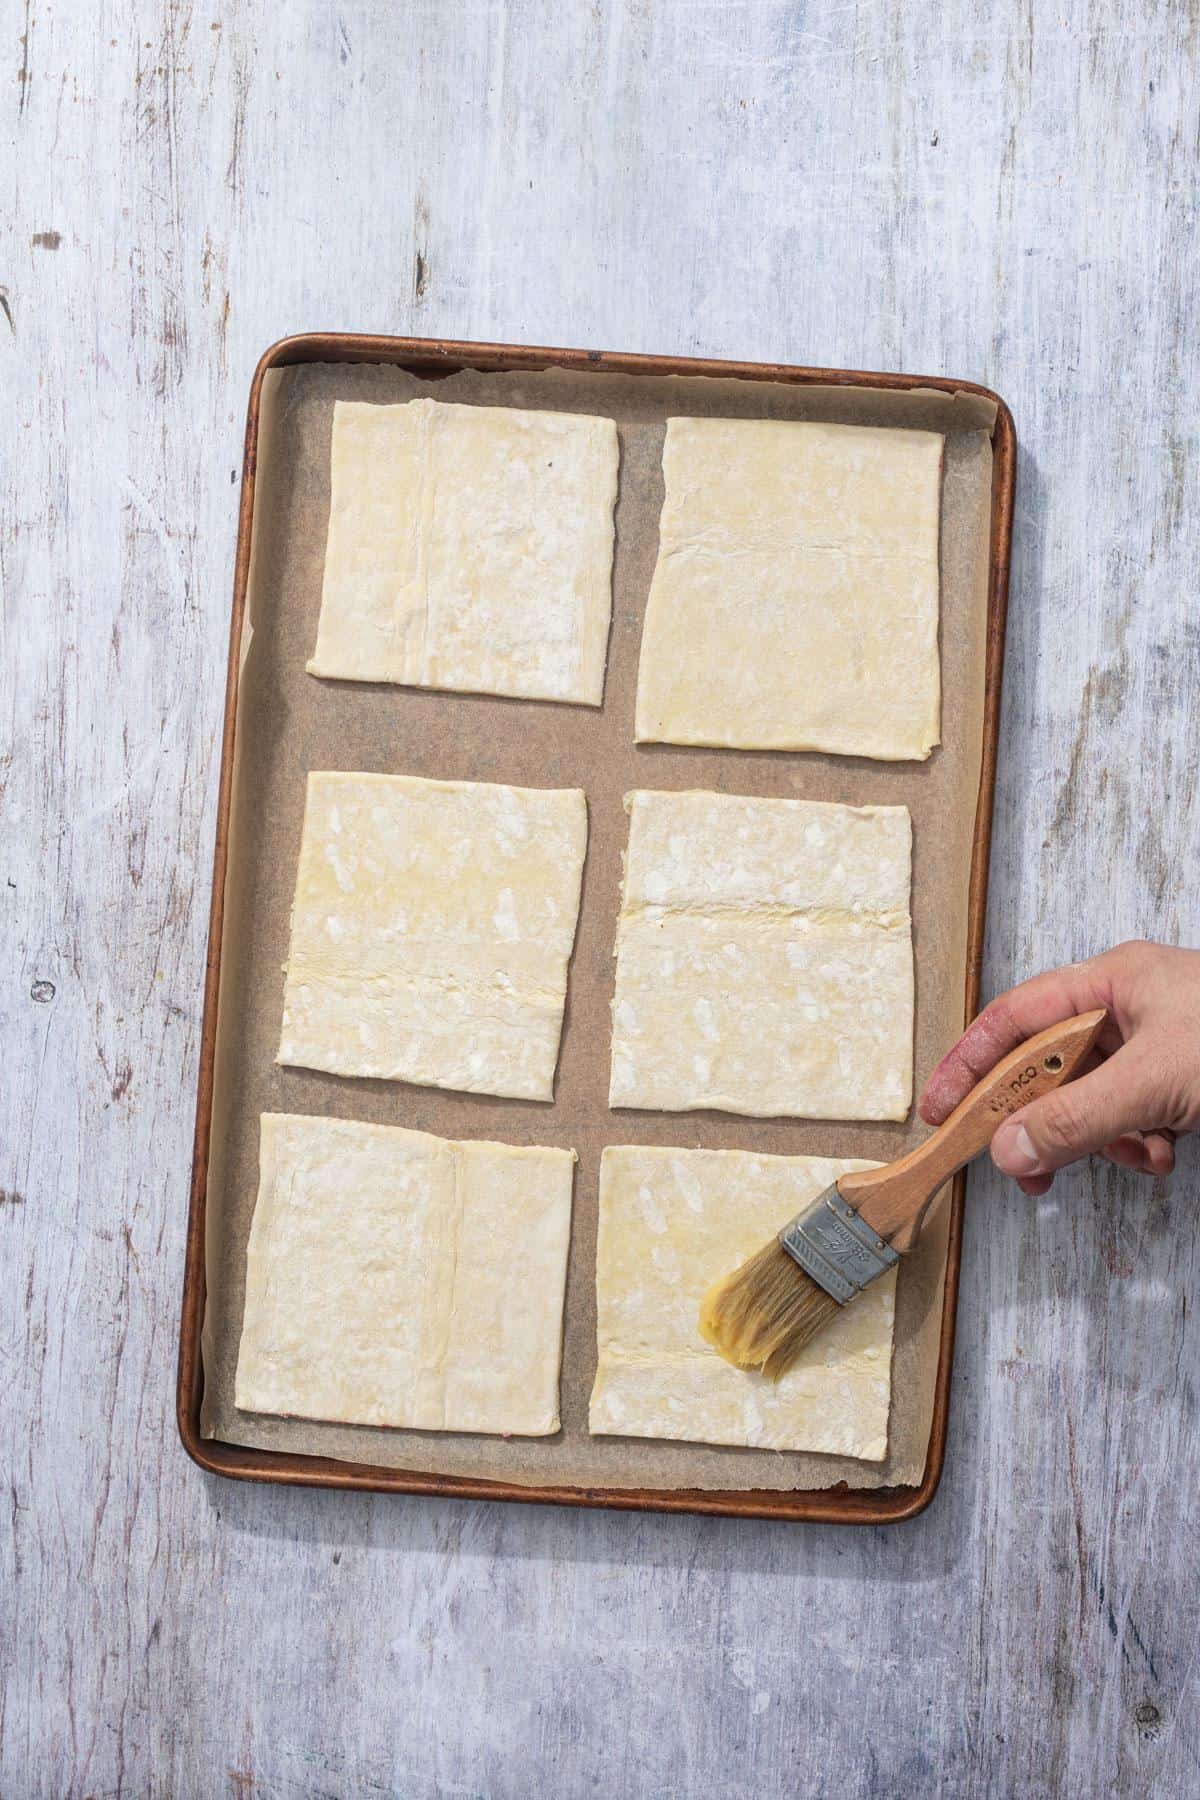 puff pastry cut into squares to make the beetroot and feta tartlets